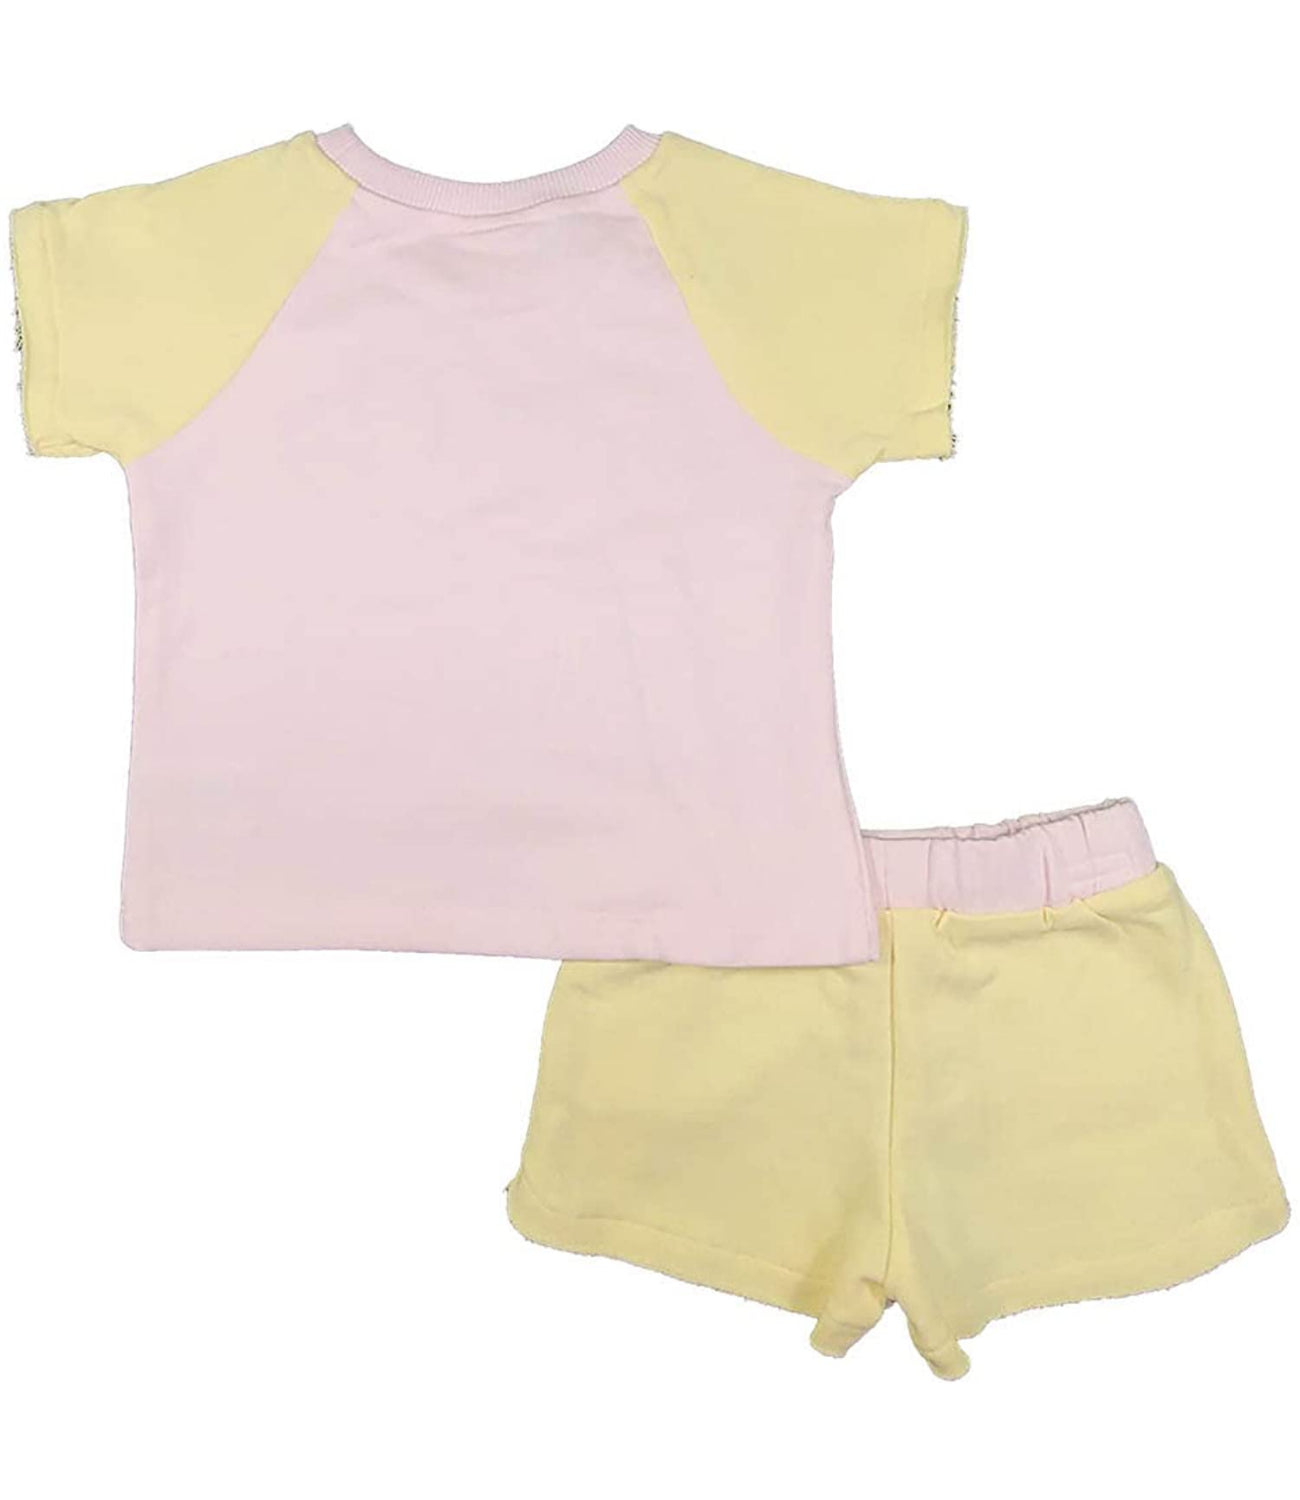 Juicy Couture Girls 2T-4T 2-Piece Colorblock Short Set - 4T / Yellow